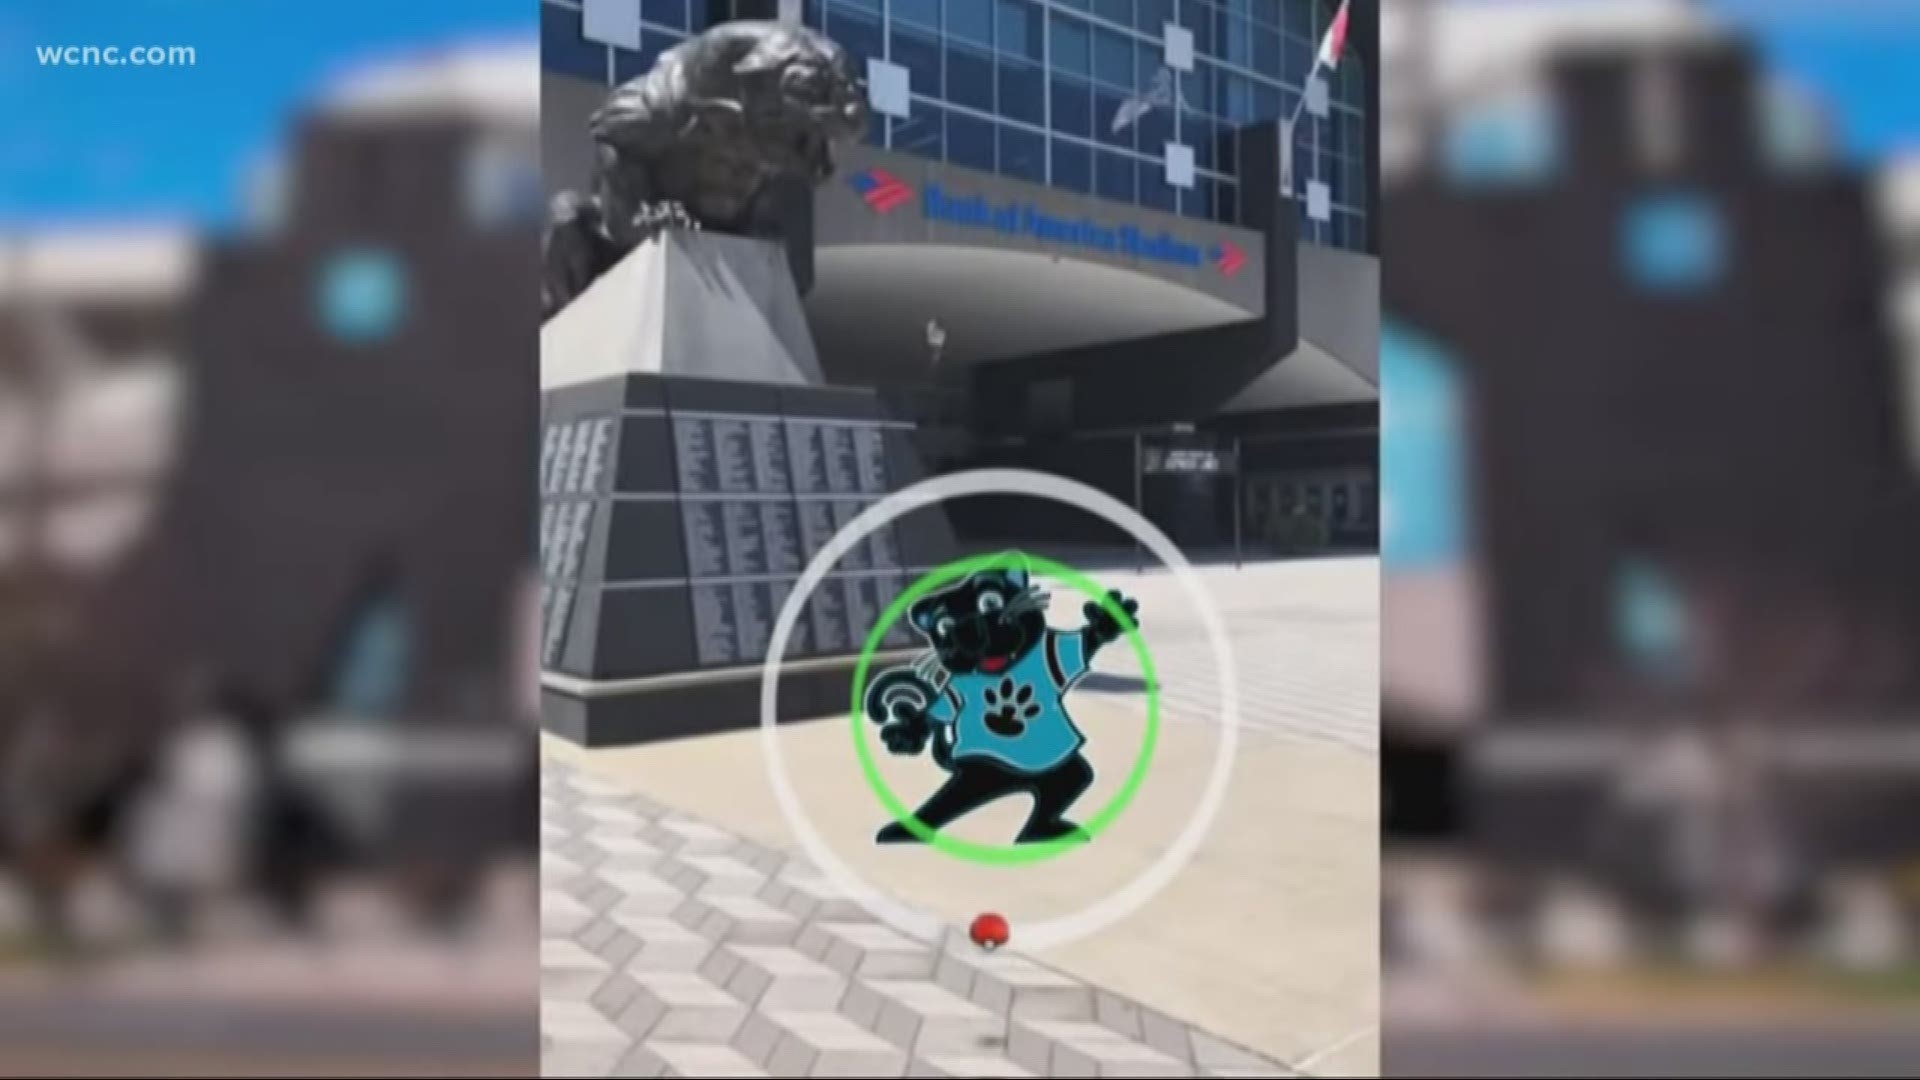 The 2019 NFL schedule was released and the Carolina Panthers were the talk of social media with their epic video game-themed announcement.